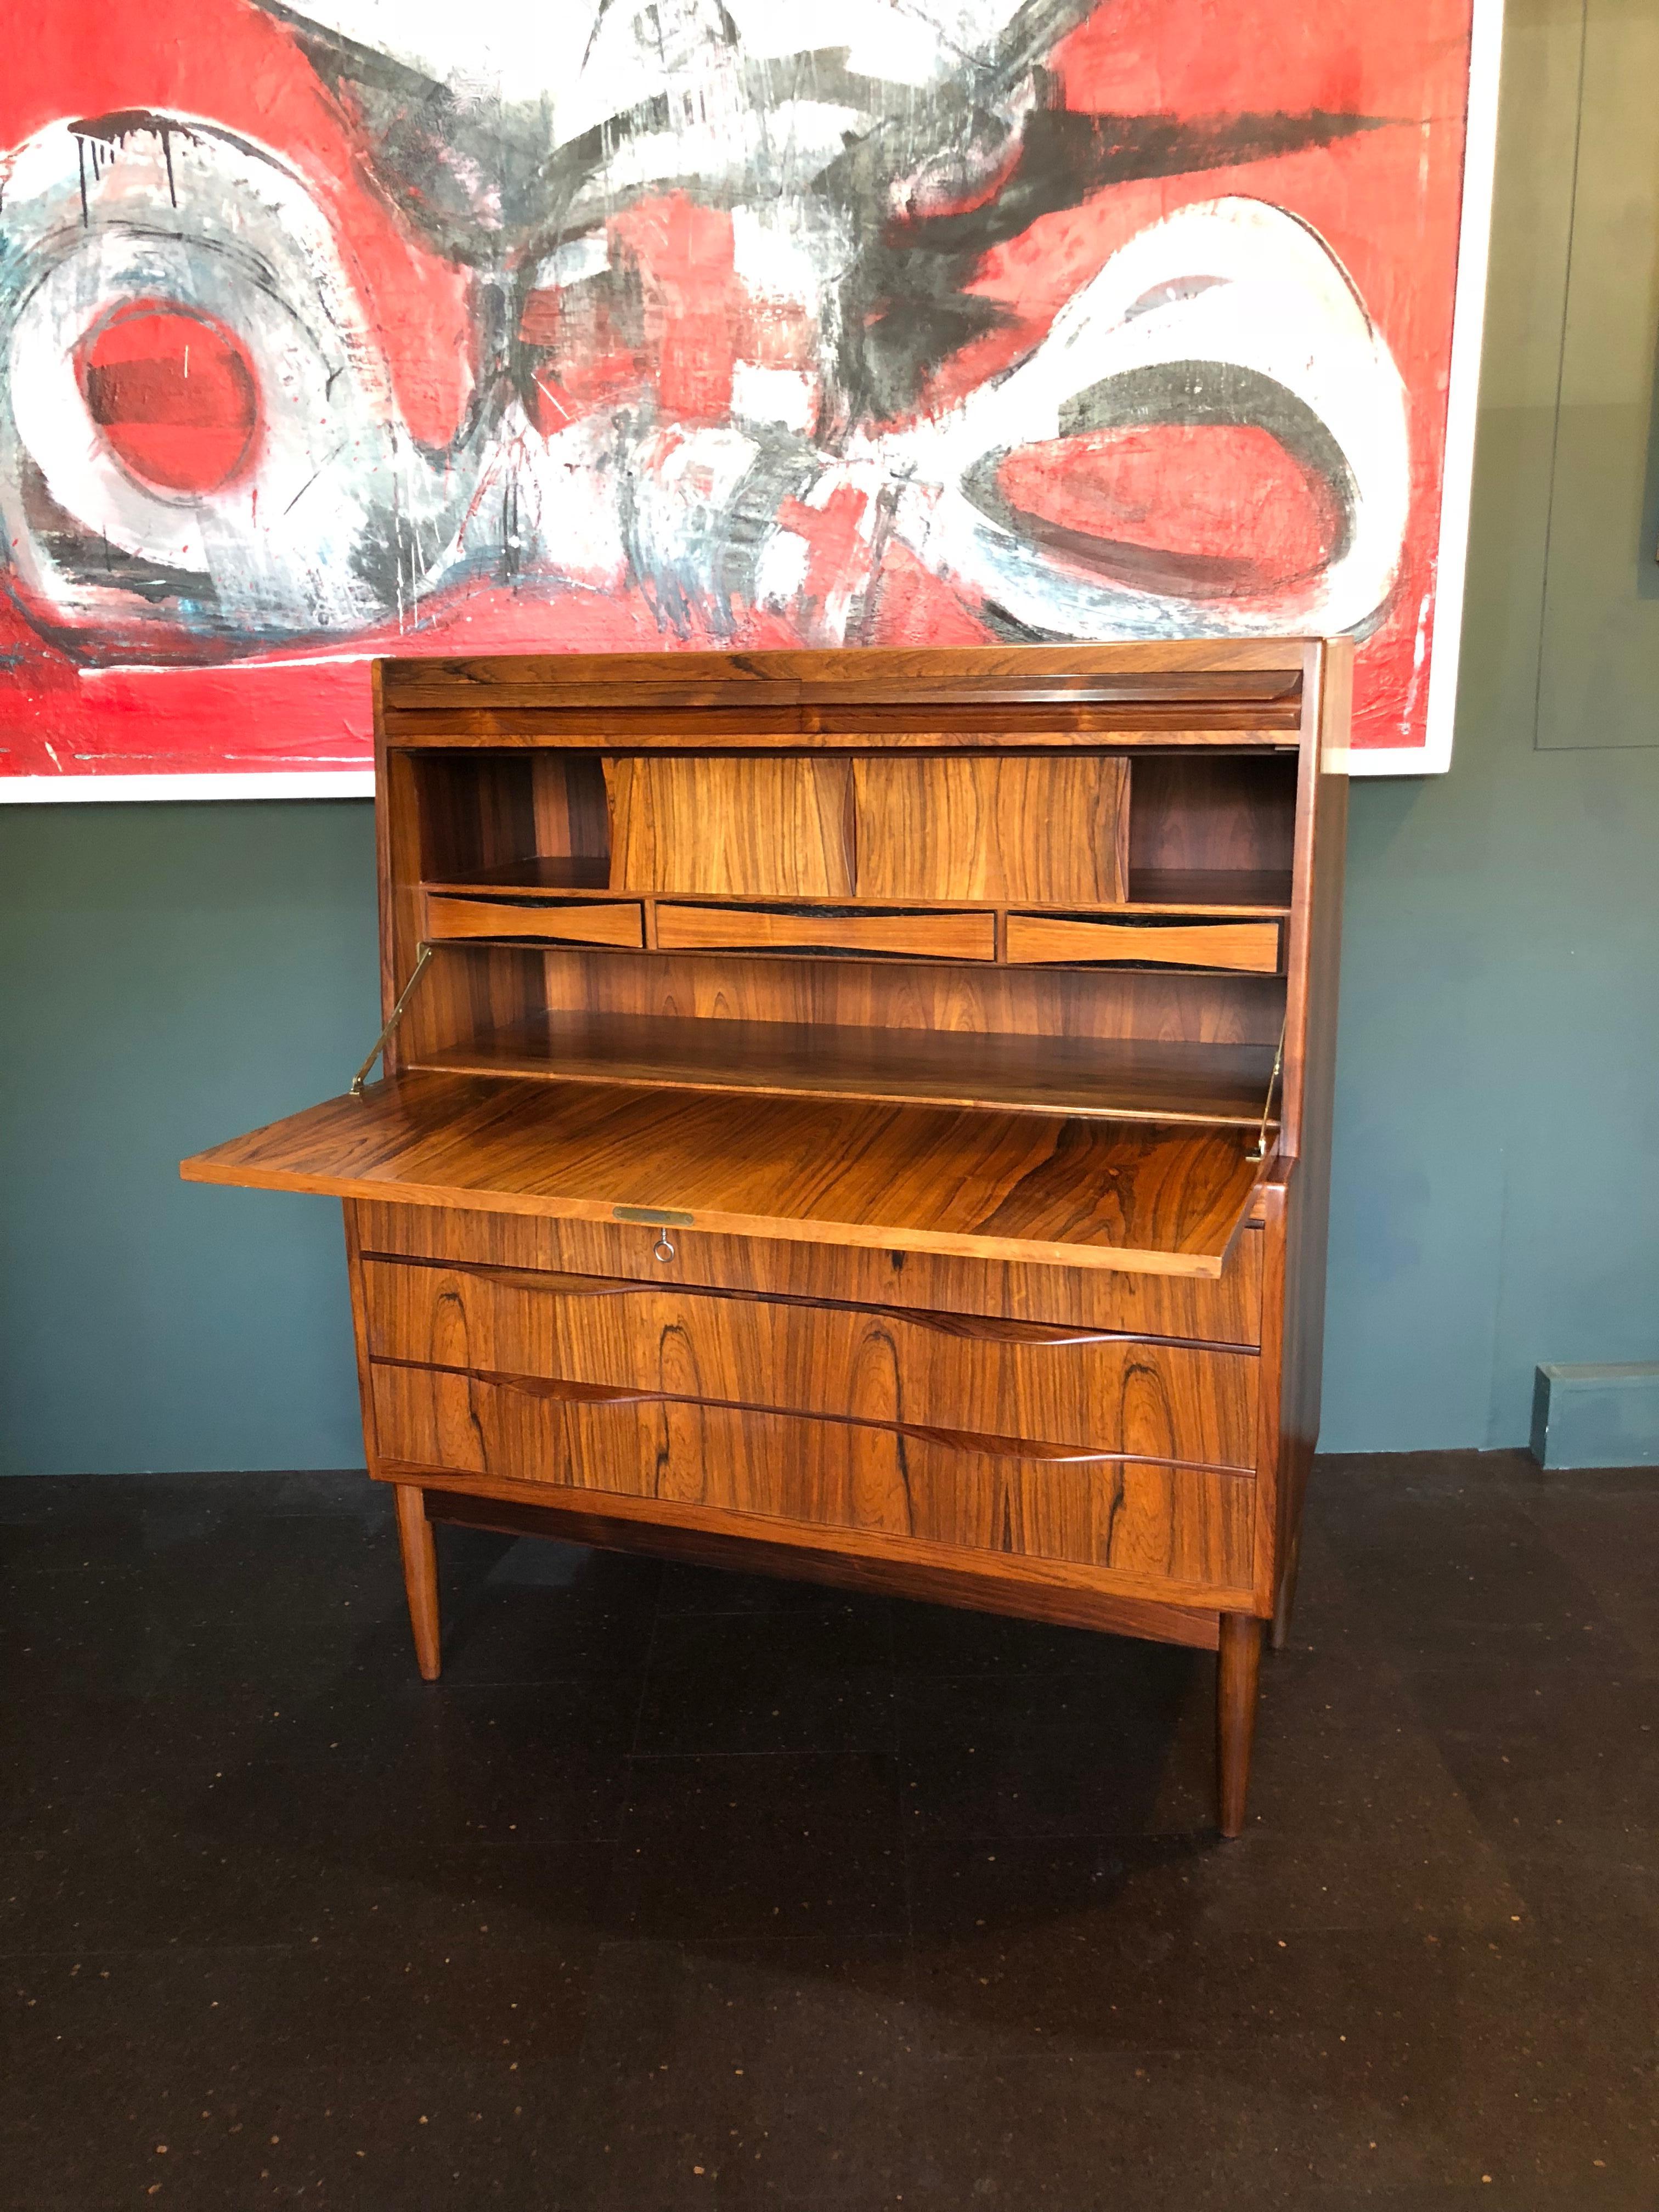 Superb rosewood Danish midcentury secretaire - Bureau. Designed by Erling Torvits. Wonderful rosewood and in very good condition throughout. Produced by respected manufacturers Klim Mobler. Completely cleaned and surface polished. Practical